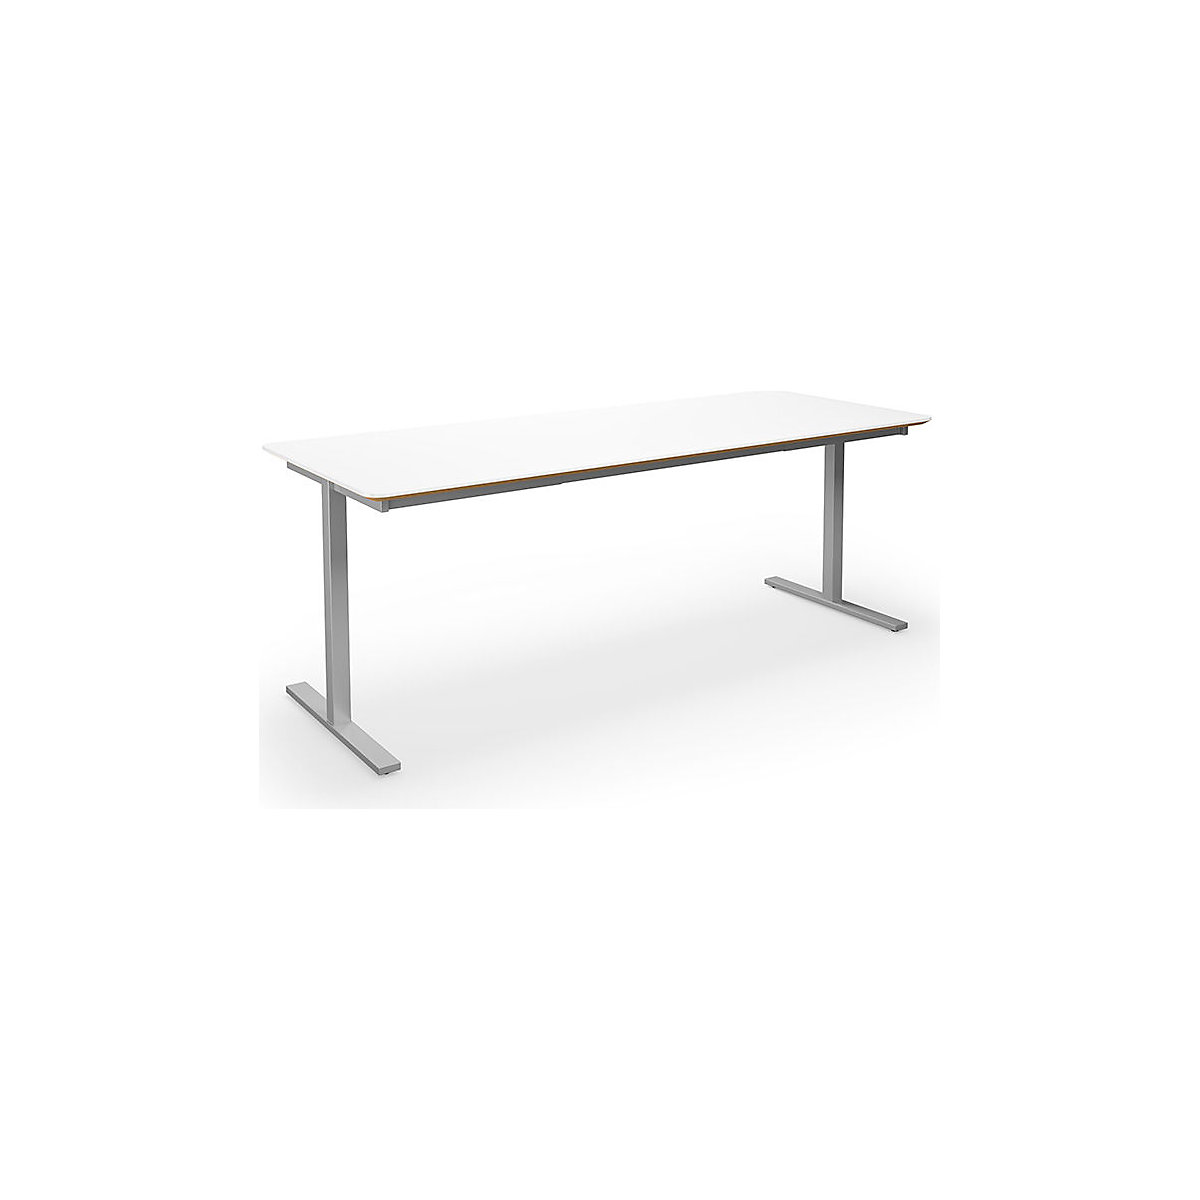 DUO-T Trend multi-purpose desk, straight tabletop, rounded corners